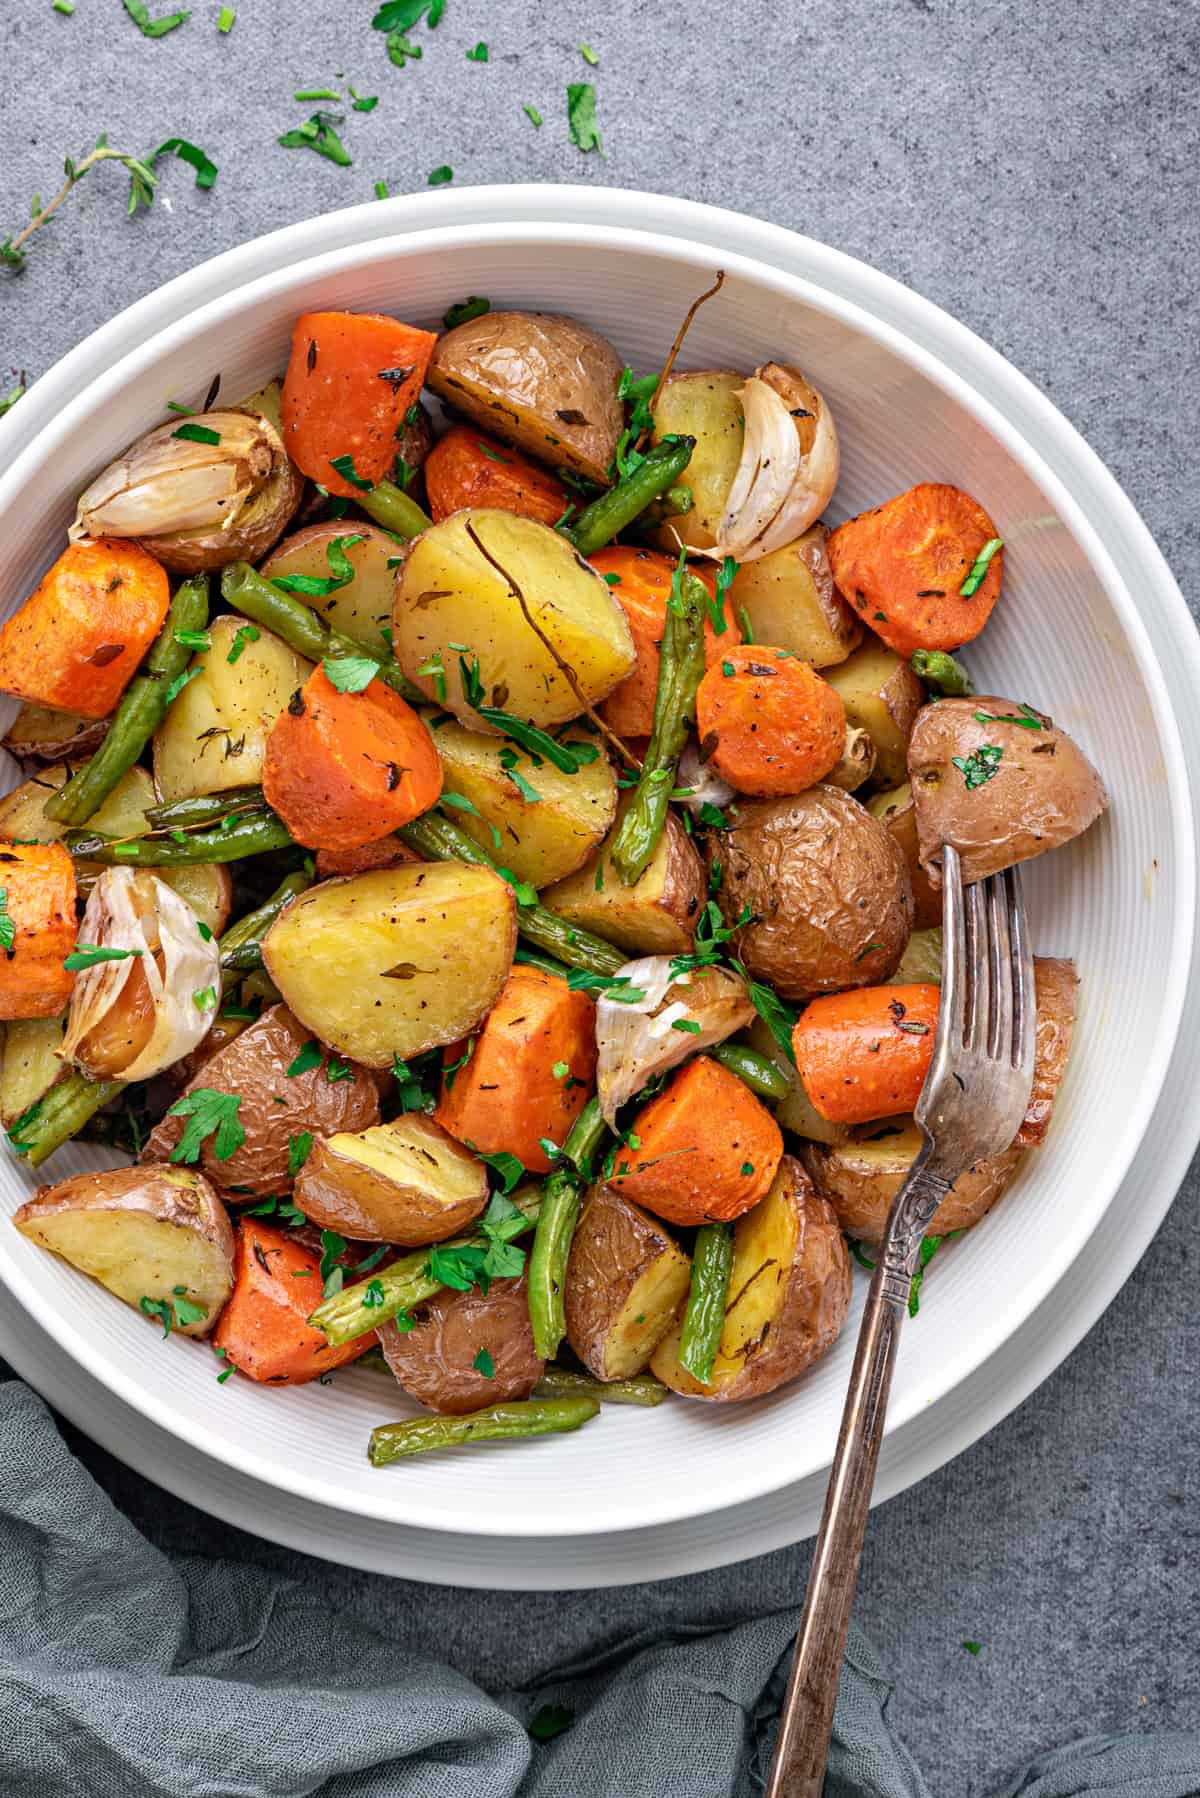 Oven Roasted Potatoes and Carrots